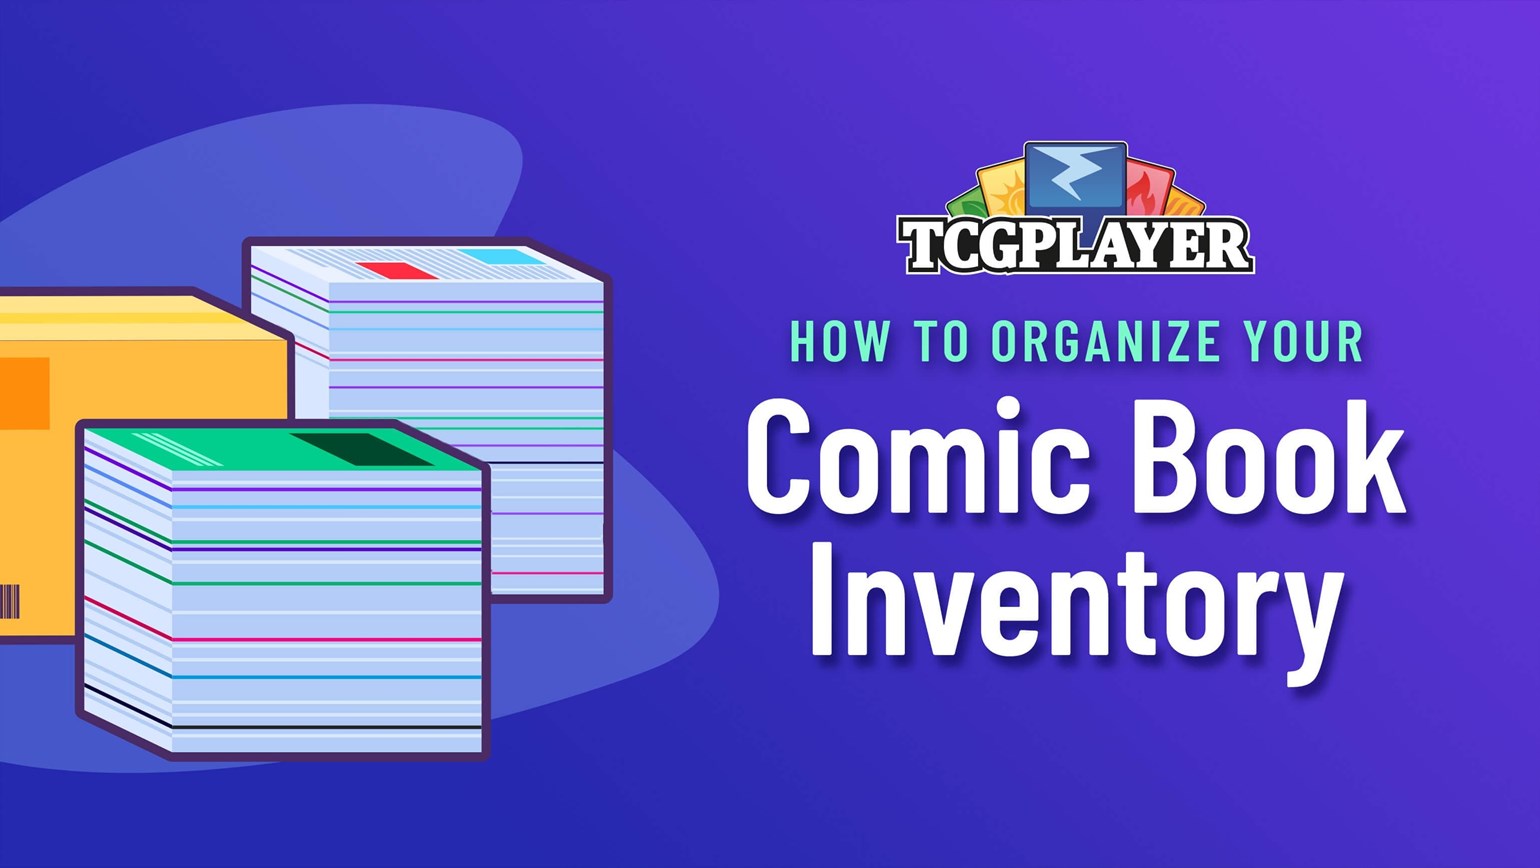 How to Organize Your Comic Book Inventory